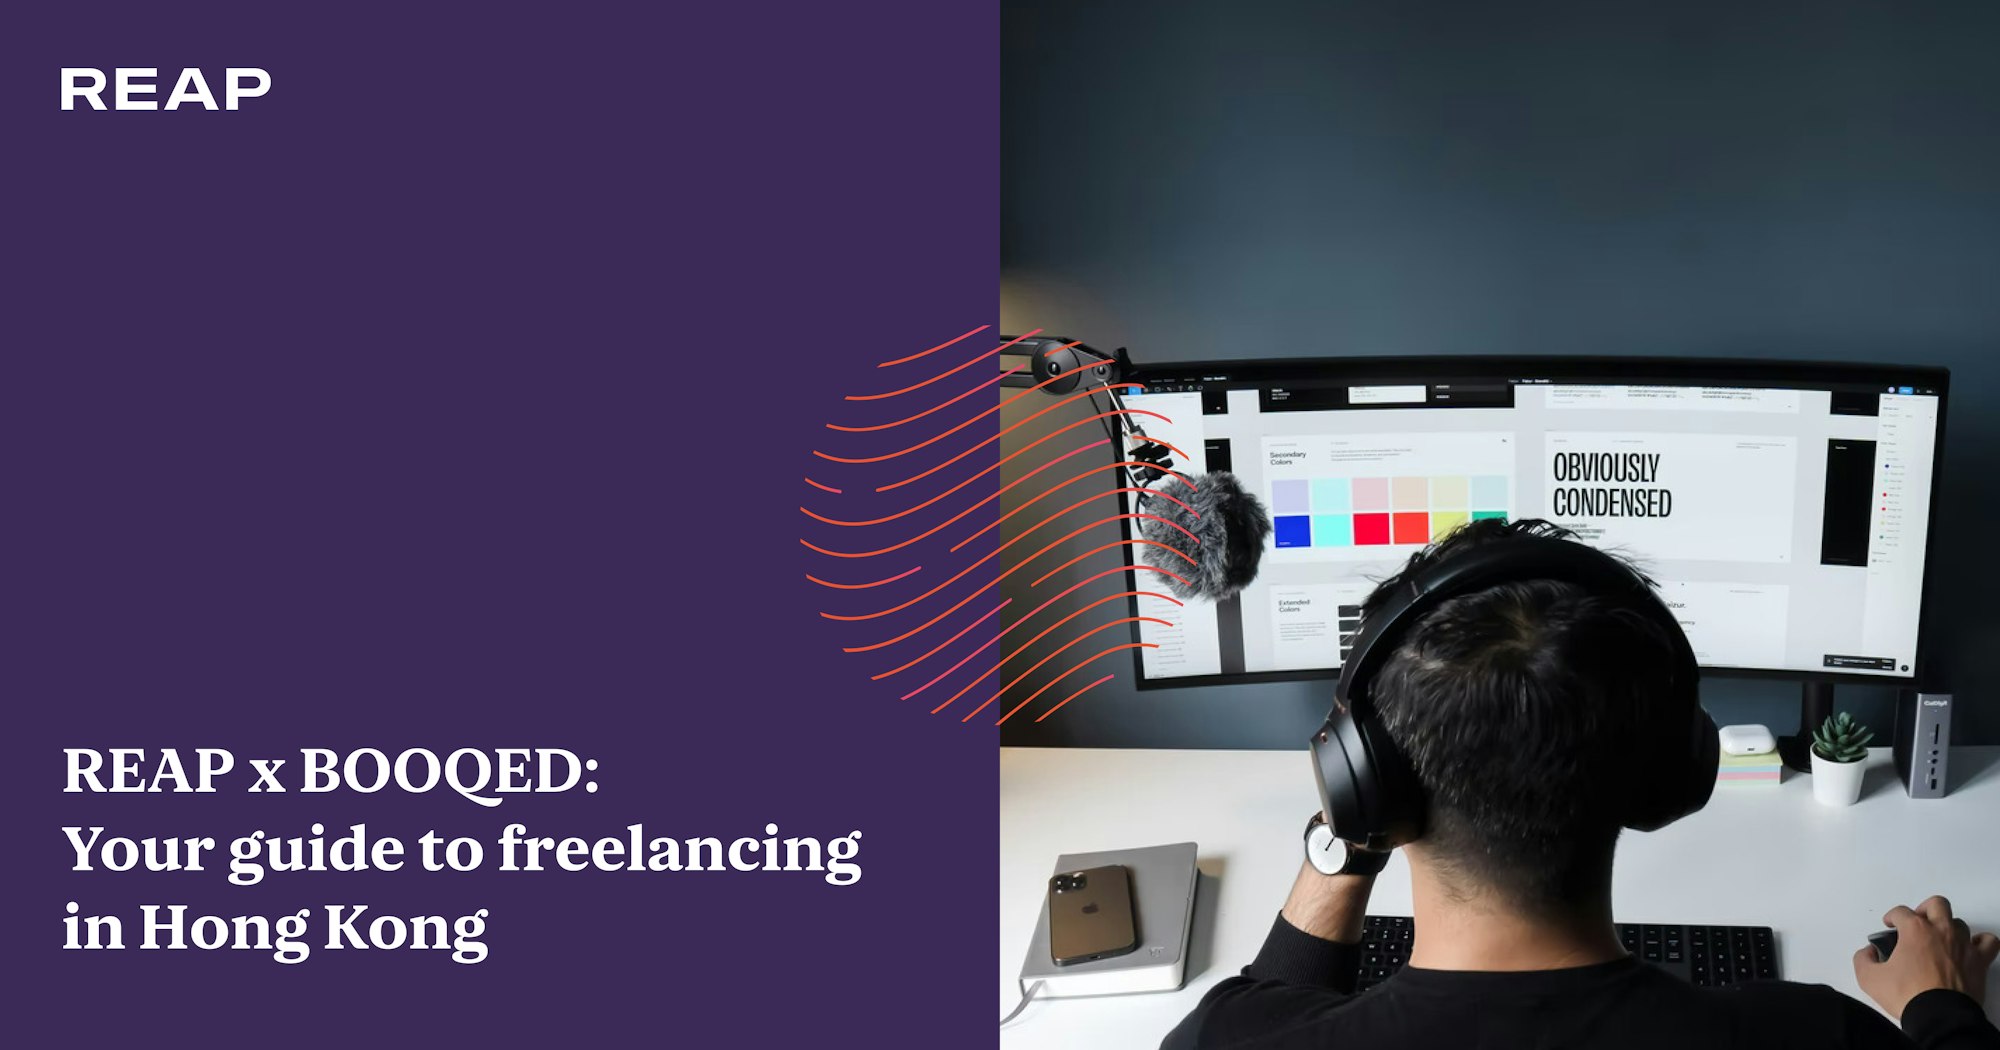 Cover Image for REAP x BOOQED: Your guide to freelancing in Hong Kong